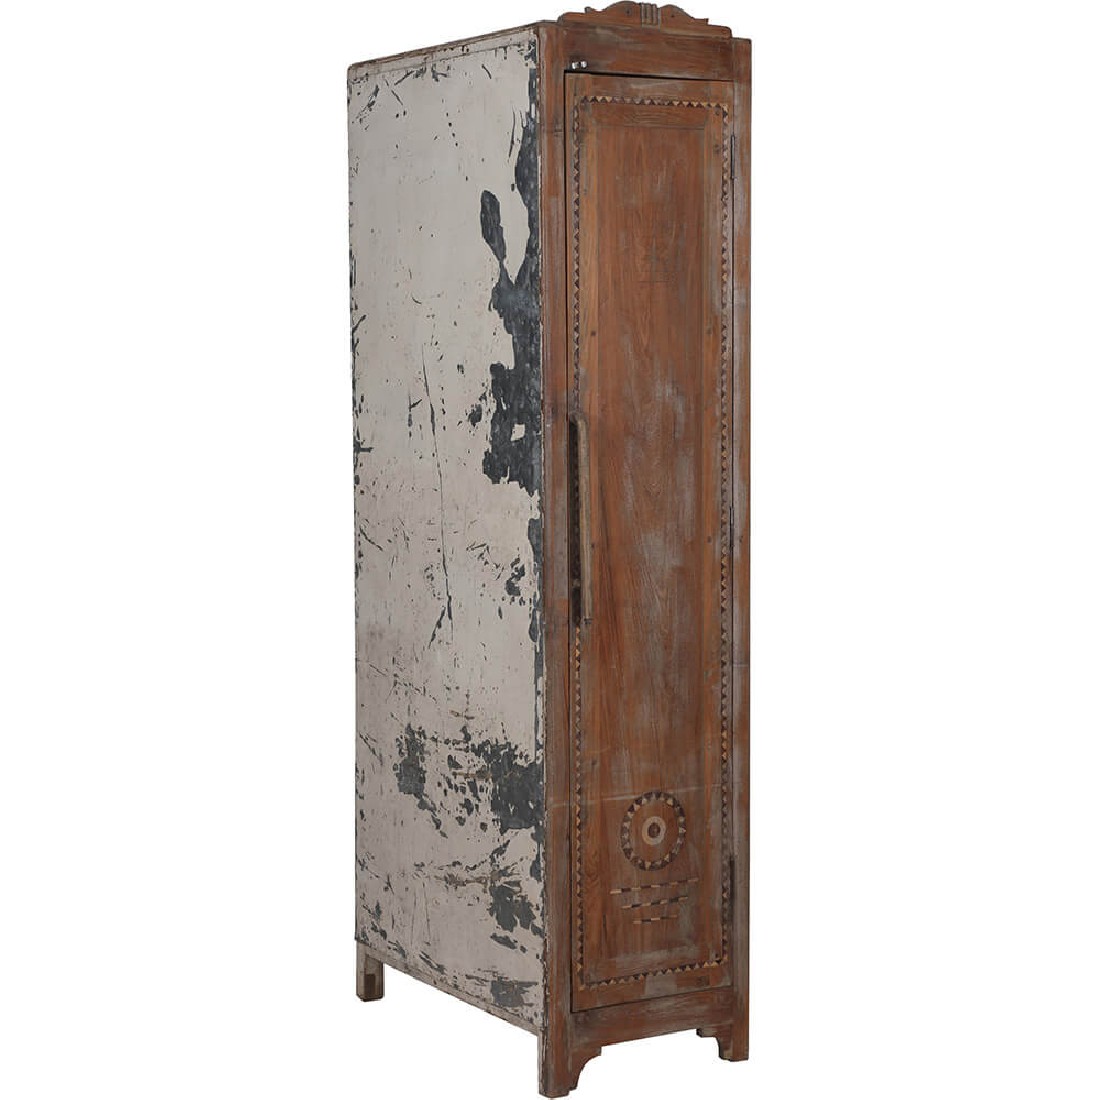 Trademark Tall cabinet with beautiful details3dhaus.gr